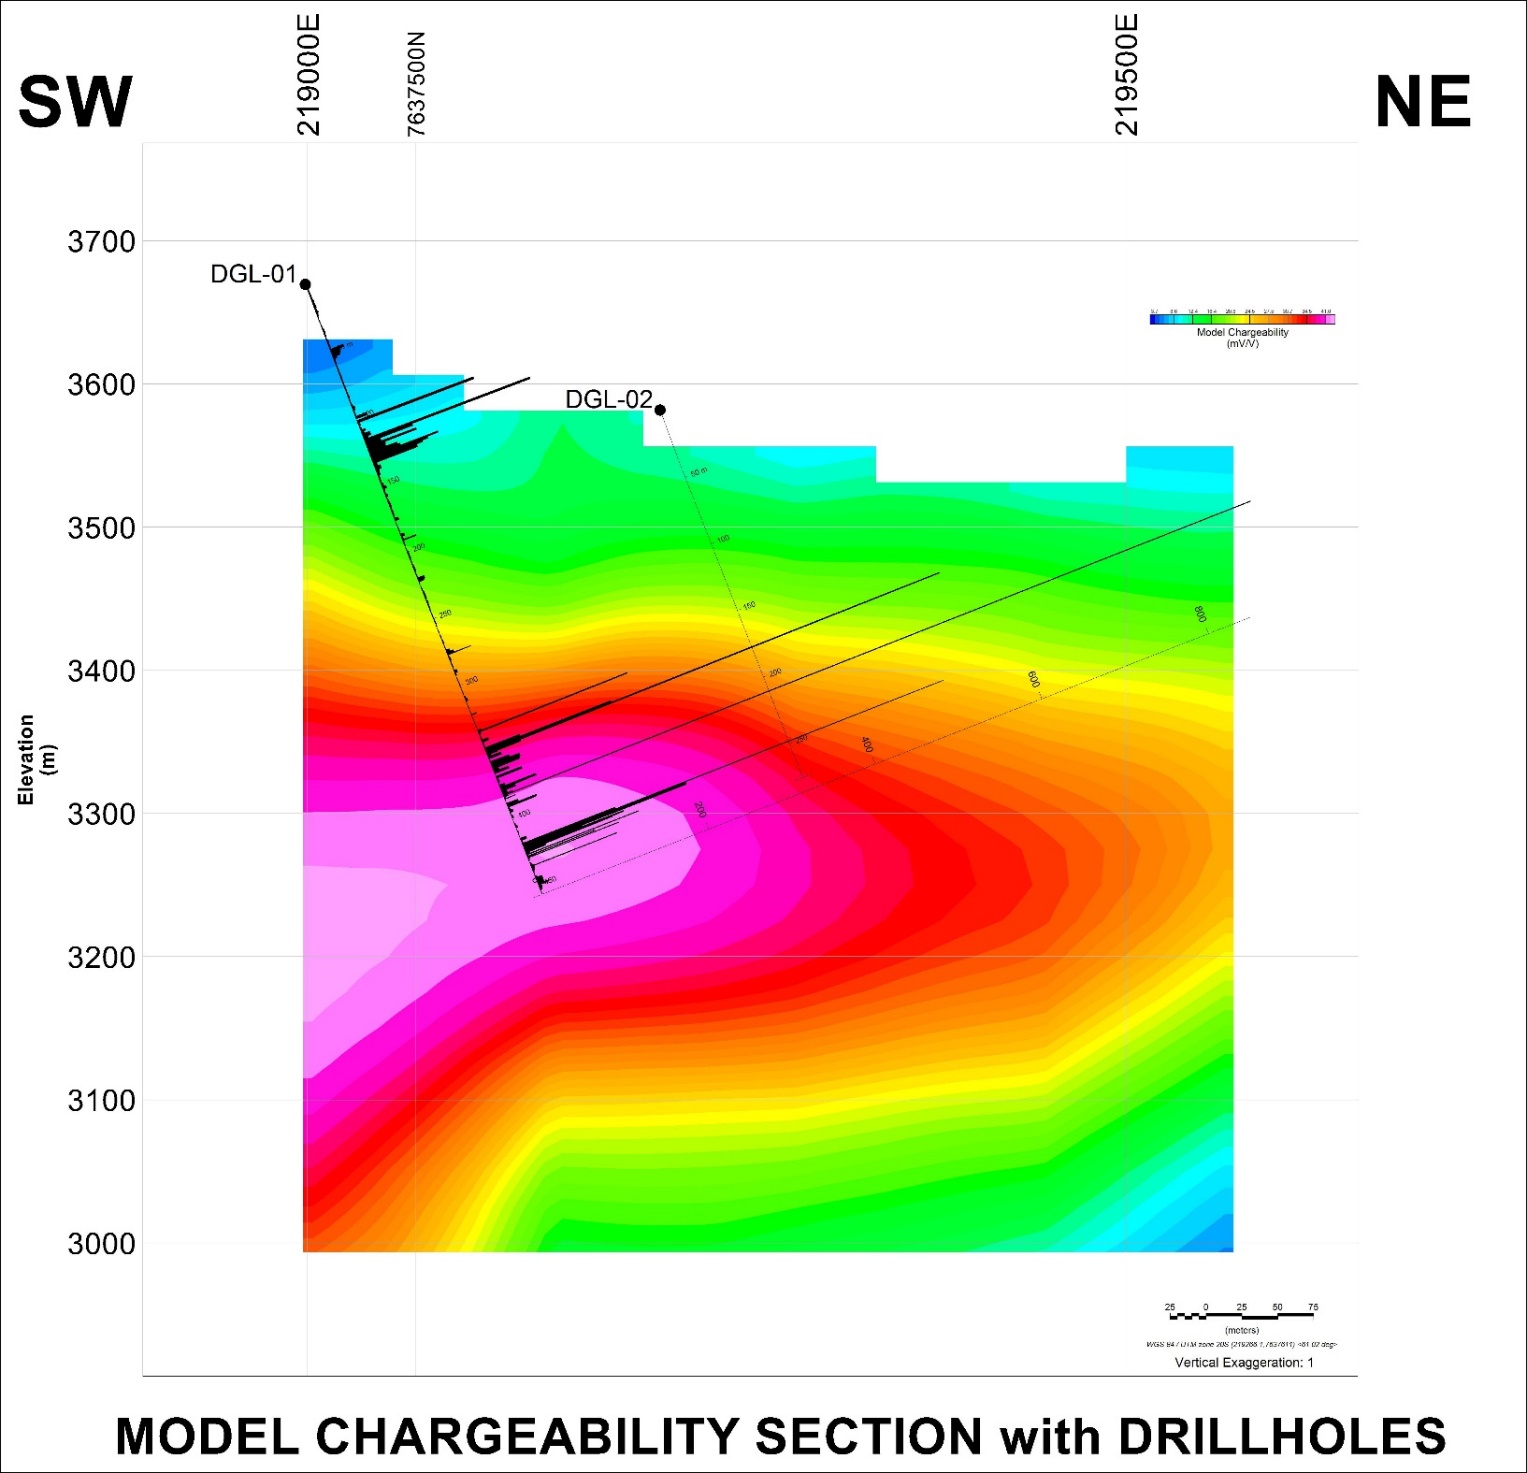 Cross Section of Model Chargeability with Drill Holes DGL-01 and DGL-02